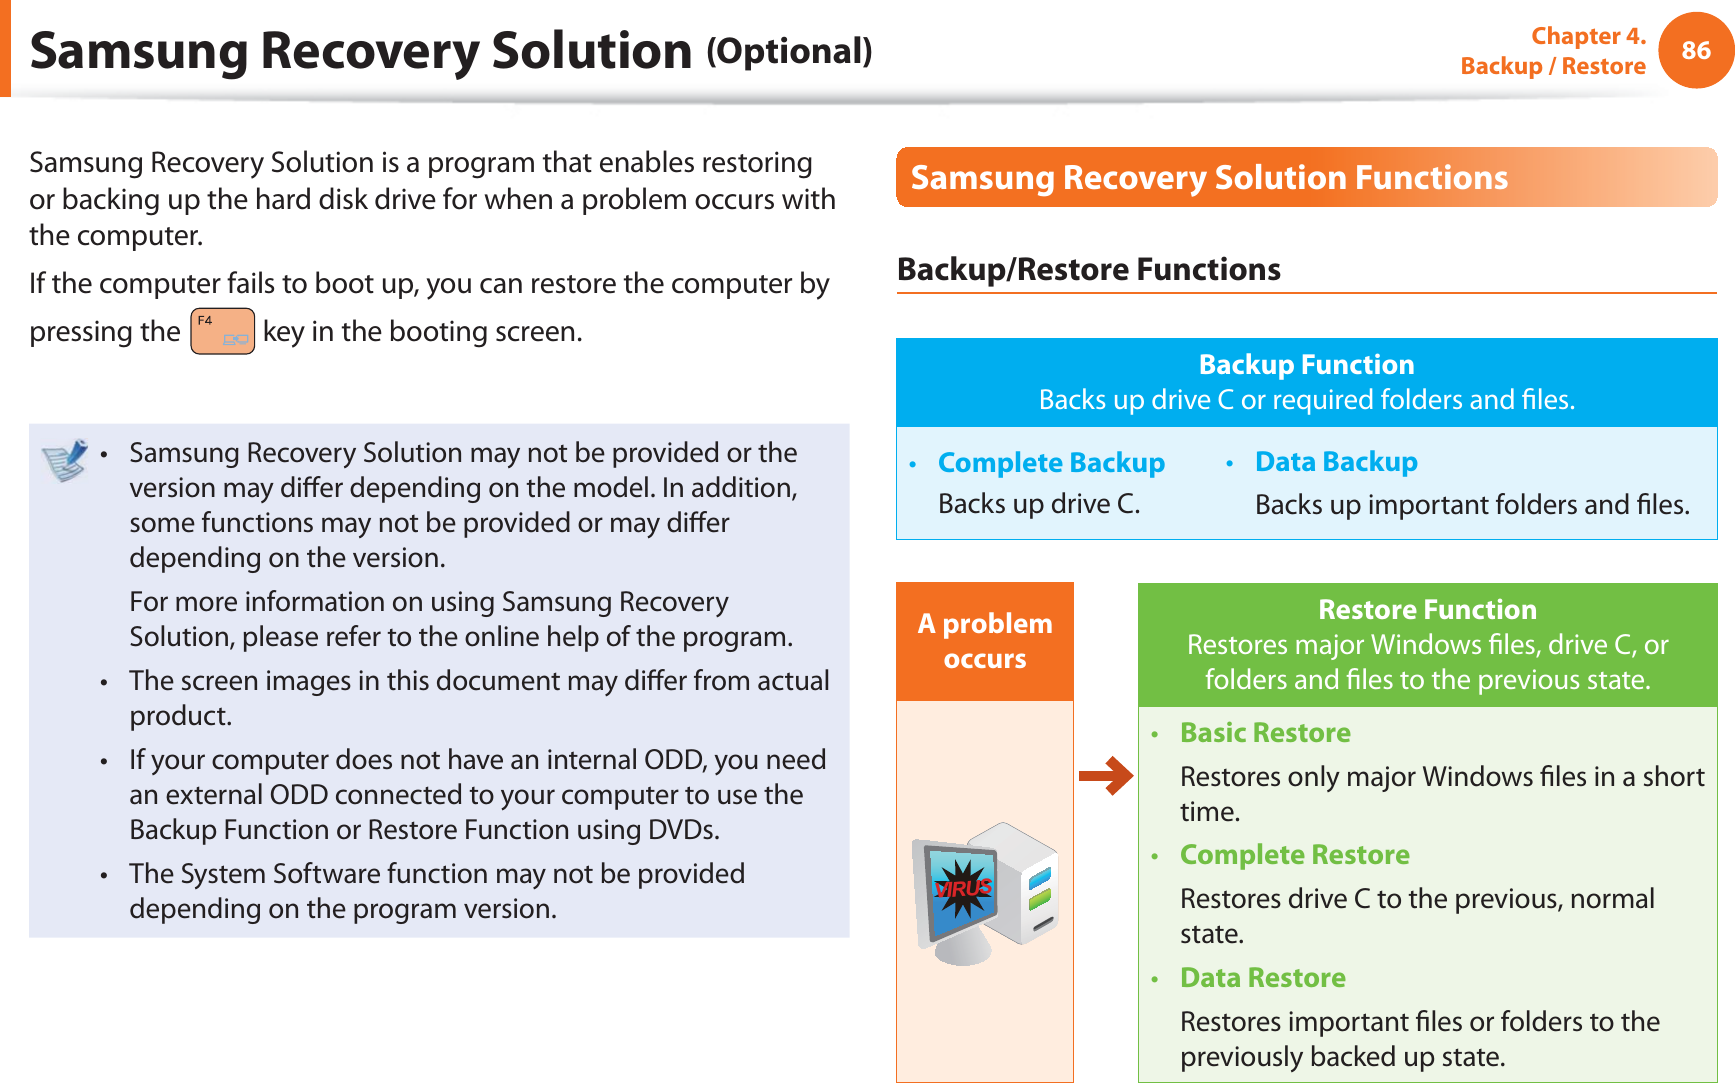 86Chapter 4.  Backup / RestoreSamsung Recovery Solution (Optional)Samsung Recovery Solution is a program that enables restoring or backing up the hard disk drive for when a problem occurs with the computer.If the computer fails to boot up, you can restore the computer by pressing the   key in the booting screen.Samsung Recovery Solution may not be provided or the t version may diﬀ er depending on the model. In addition, some functions may not be provided or may diﬀ er depending on the version.  For more information on using Samsung Recovery Solution, please refer to the online help of the program.The screen images in this document may diﬀ er from actual t product.If your computer does not have an internal ODD, you need t an external ODD connected to your computer to use the Backup Function or Restore Function using DVDs.The System Software function may not be provided t depending on the program version.Samsung Recovery Solution FunctionsBackup/Restore FunctionsBackup FunctionBacks up drive C or required folders and ﬁ les.Complete Backupt   Backs up drive C.Data Backupt   Backs up important folders and ﬁ les.A problem occursVIRUSRestore FunctionRestores major Windows ﬁ les, drive C, or folders and ﬁ les to the previous state.Basic Restoret   Restores only major Windows ﬁ les in a short time.Complete Restoret   Restores drive C to the previous, normal state.Data Restoret   Restores important ﬁ les or folders to the previously backed up state.